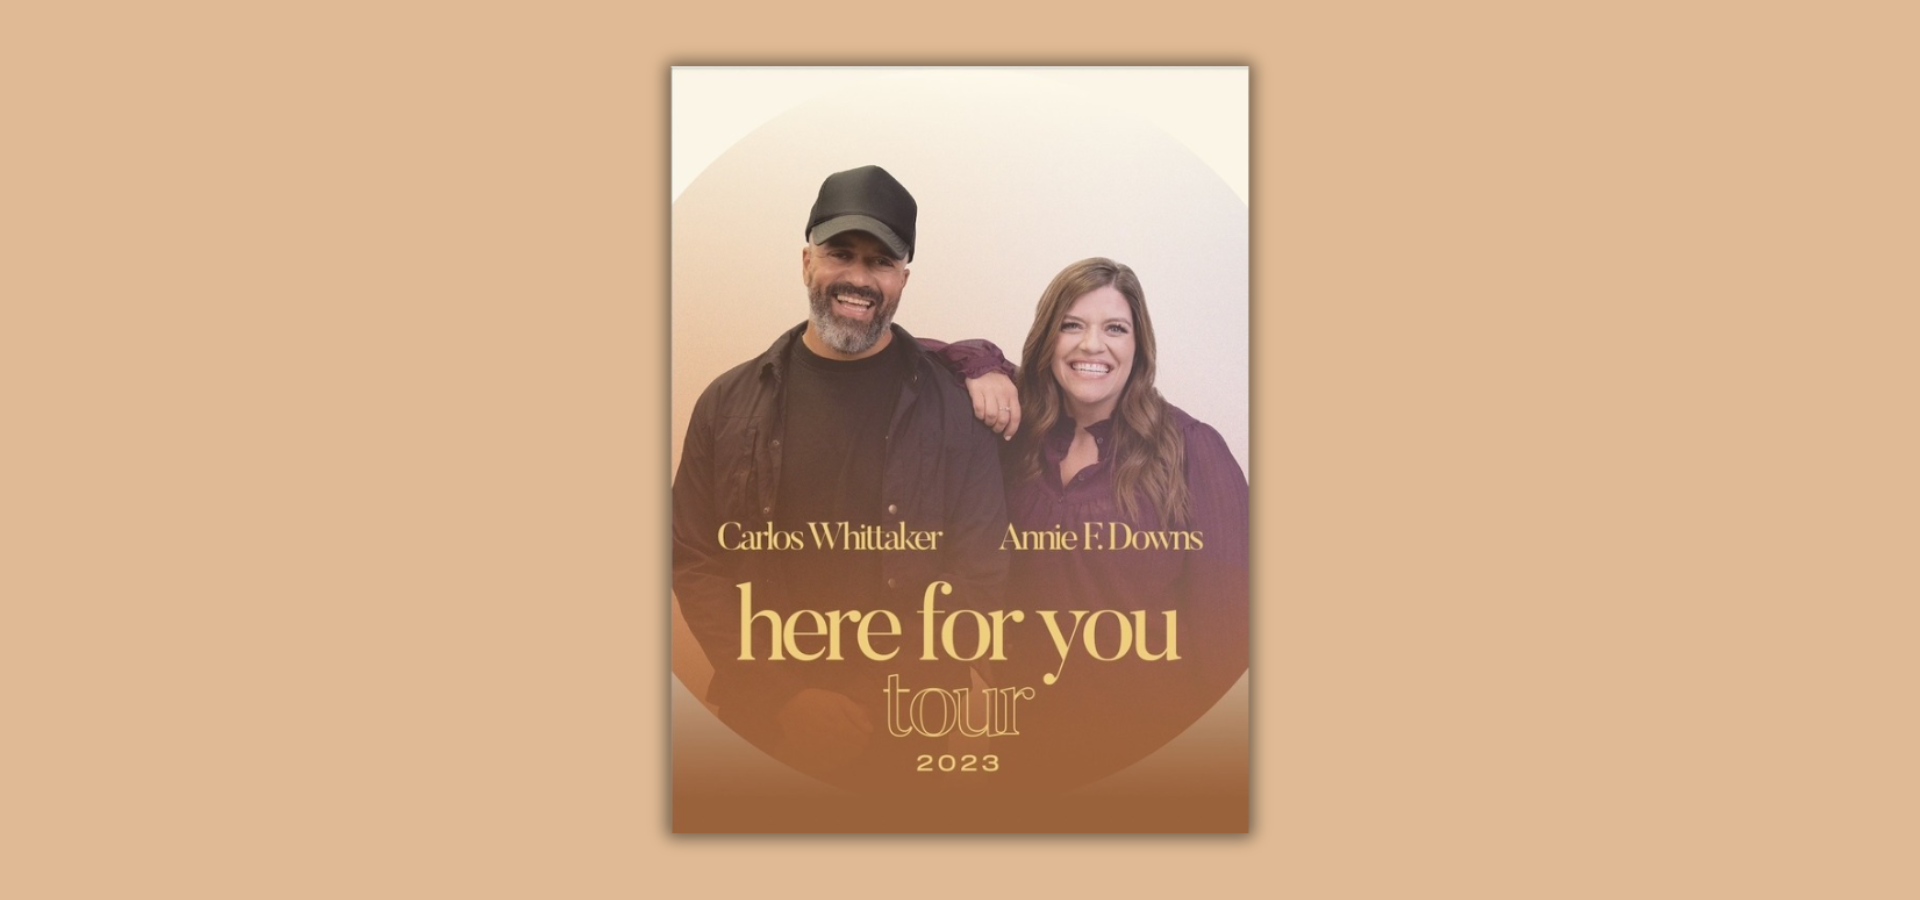 Annie F. Downs and Carlos Whittaker Raise Over $45,000 on "Here For You" Tour